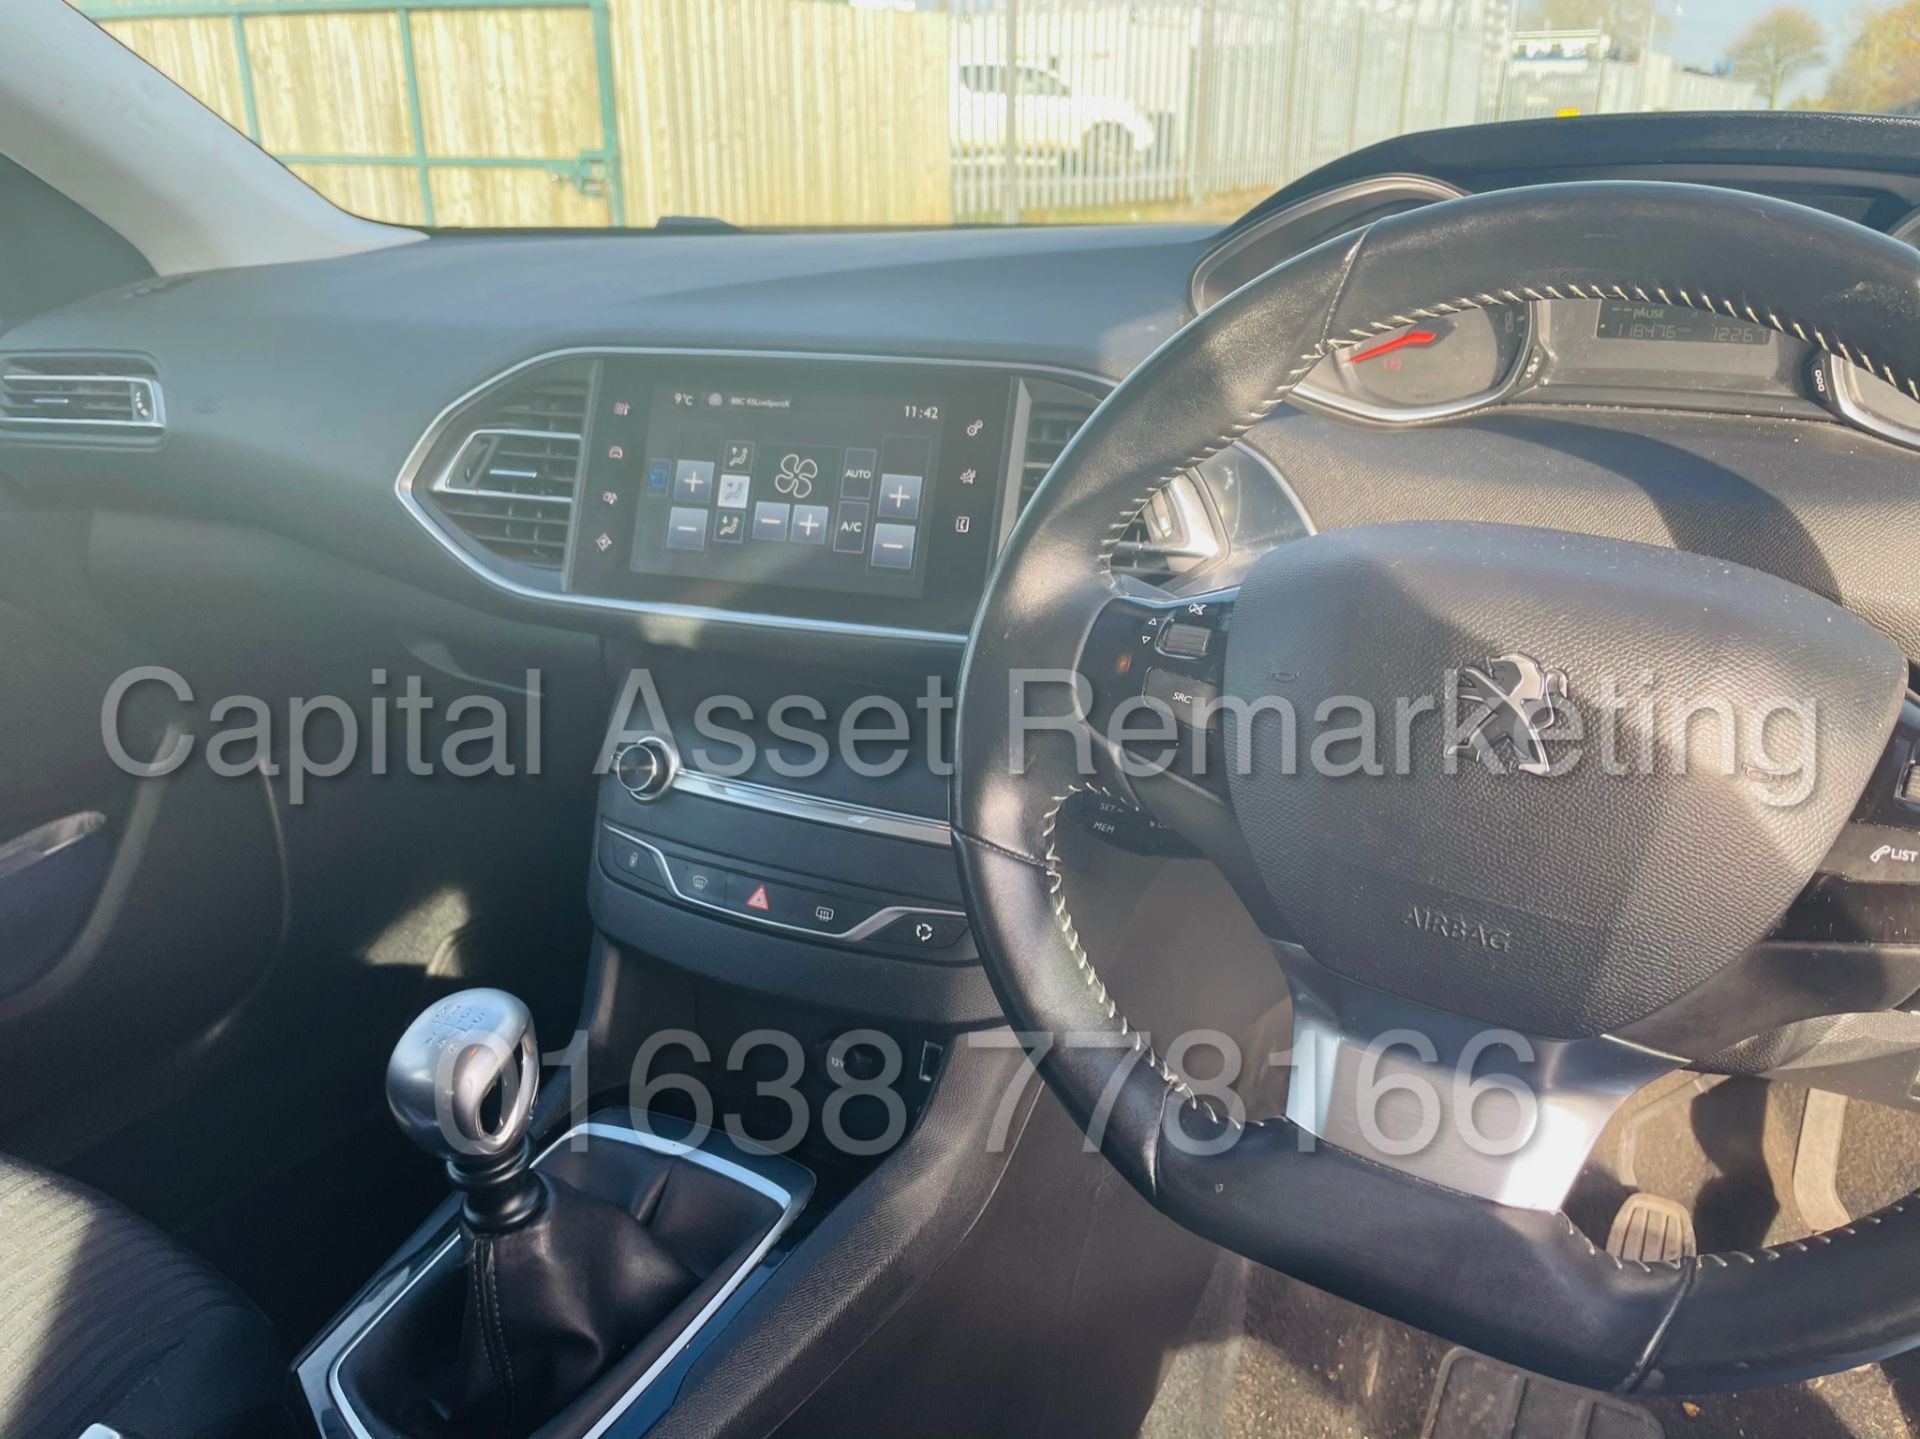 PEUGEOT 308 *ACTIVE EDITION* 5 DOOR ESTATE (2017 - EURO 6) '1.6 BLUE HDI - 120 BHP - 6 SPEED' *A/C* - Image 31 of 40